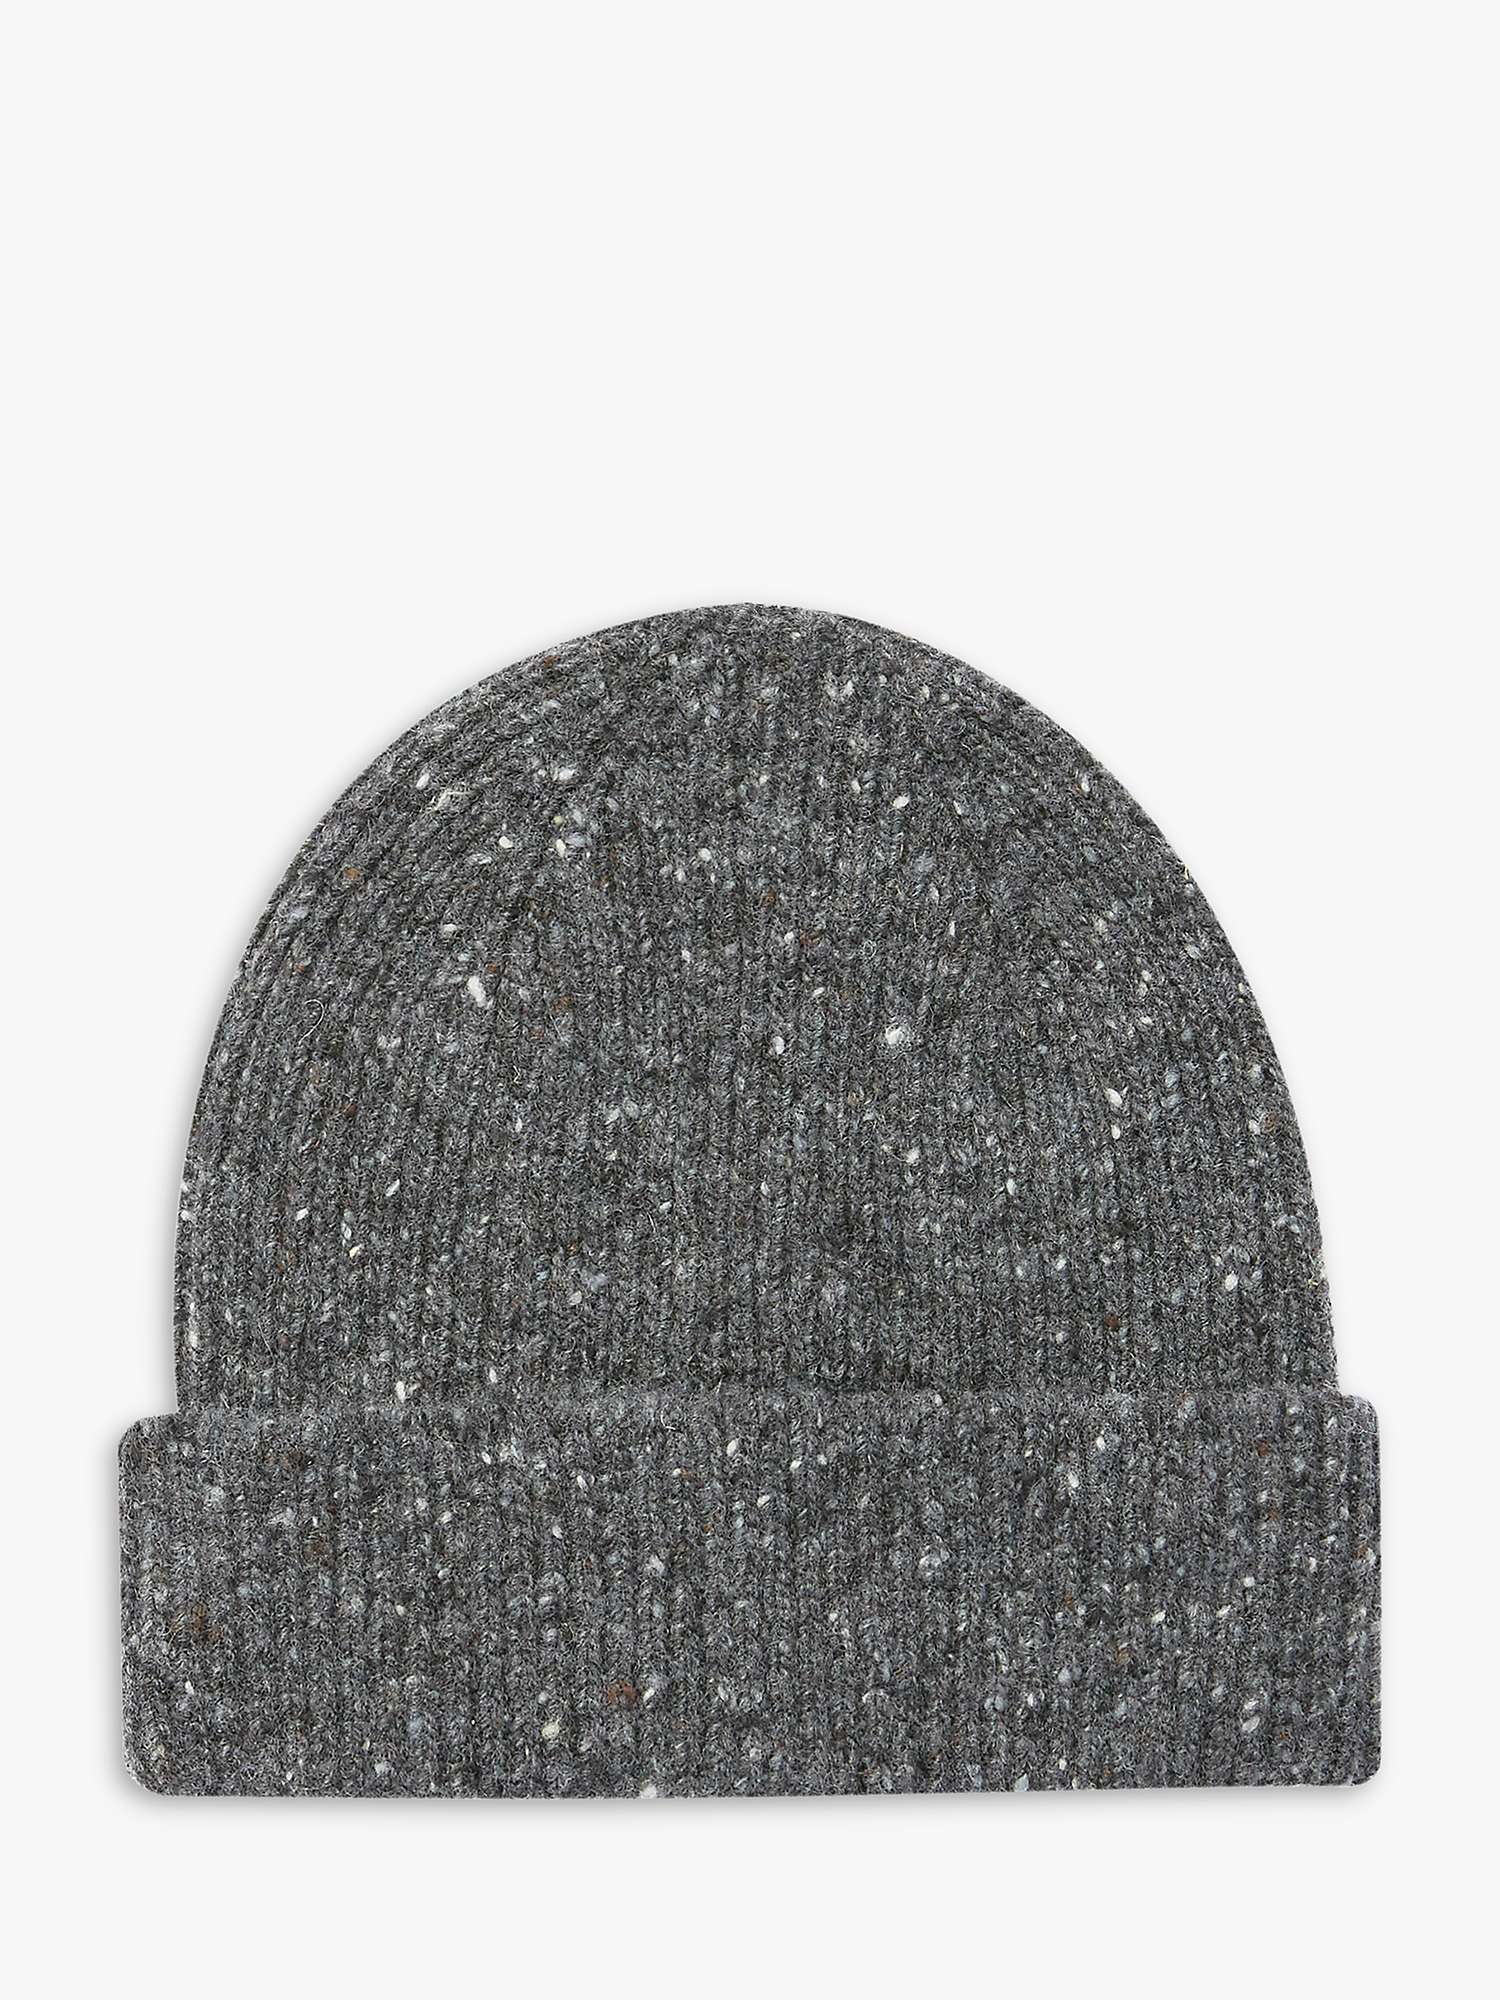 Buy Celtic & Co. Unisex Donegal Wool Beanie Hat, Charcoal Online at johnlewis.com